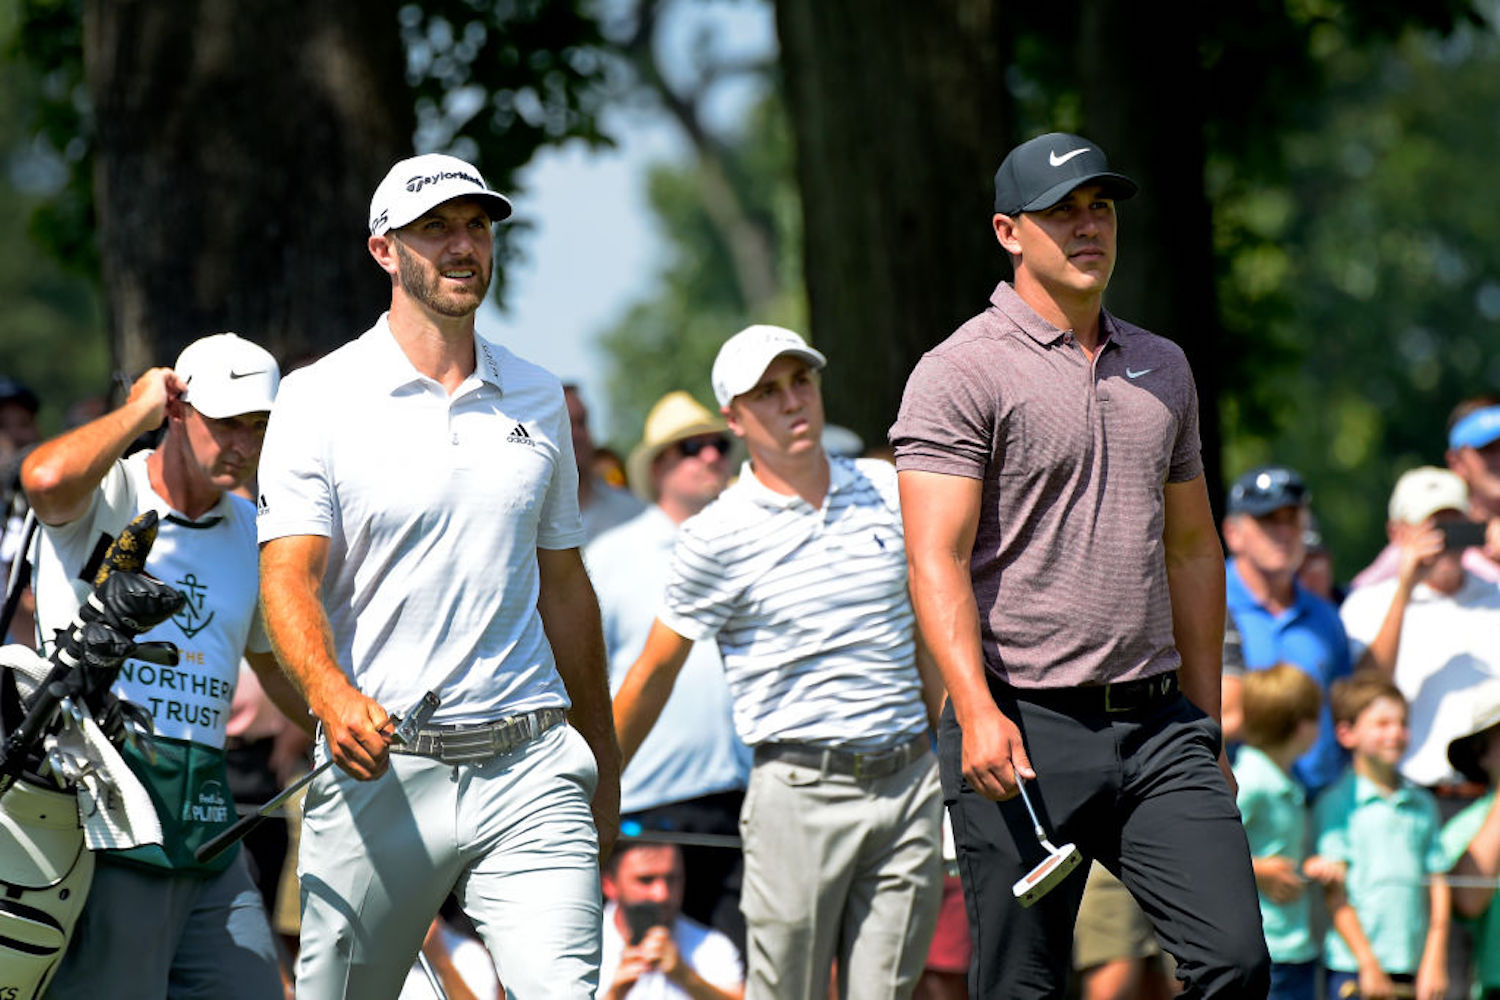 Brooks Koepka called out Dustin Johnson for his lack of majors a few weeks back, and Johnson responded with a historic run of golf.